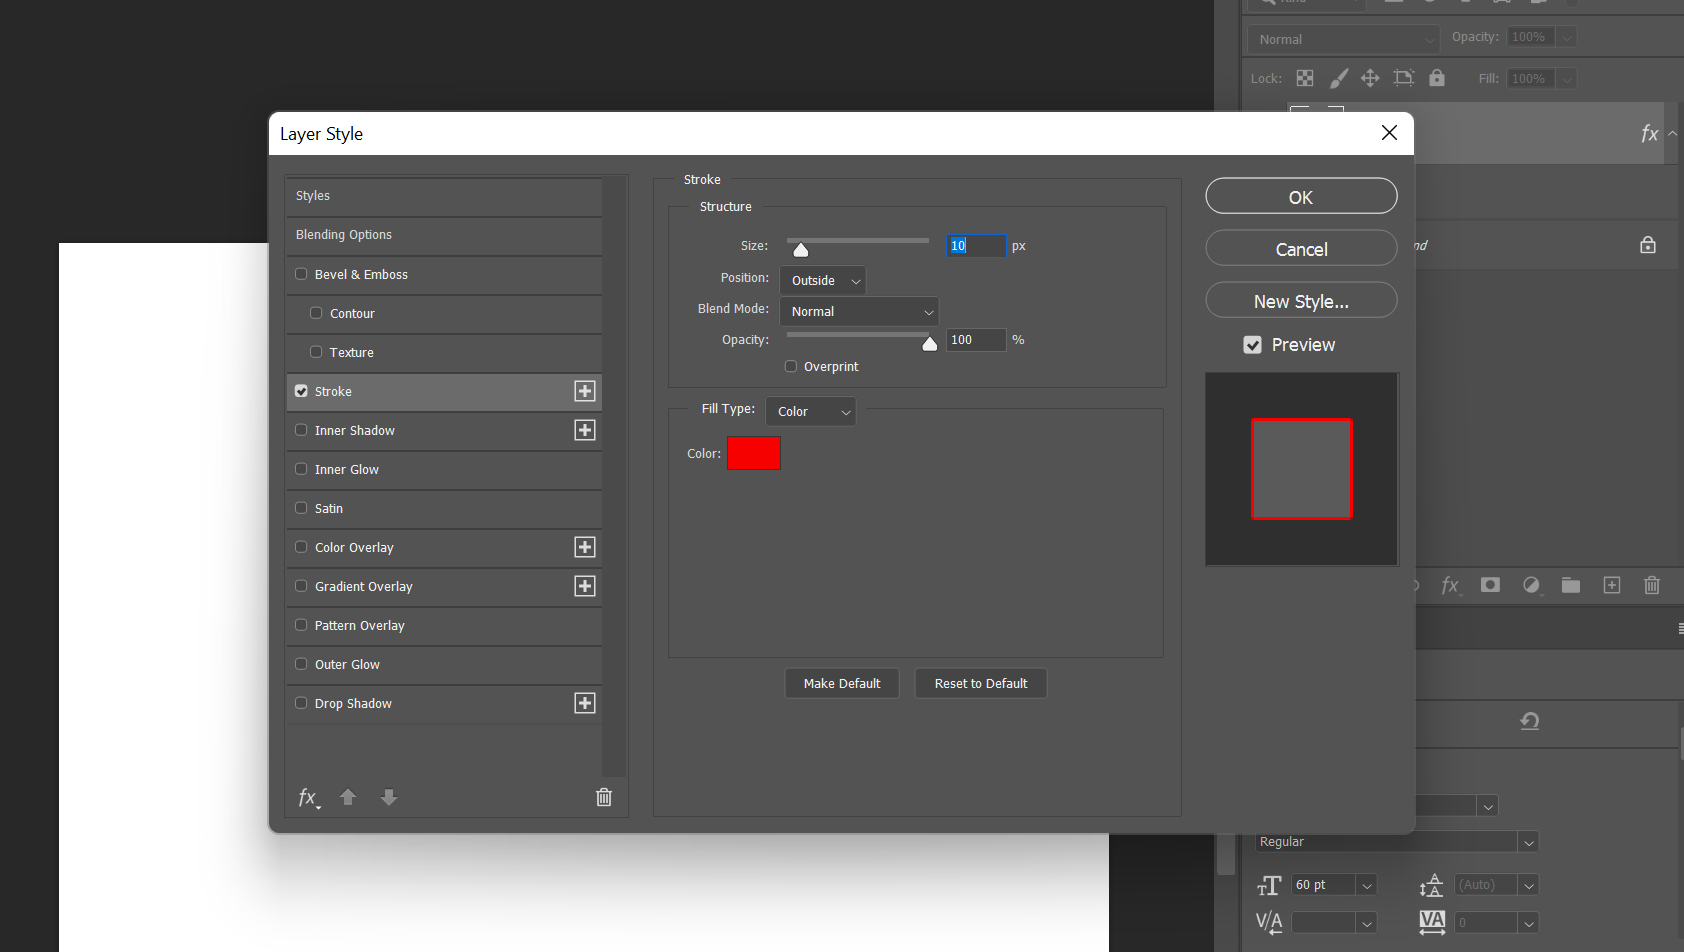 Adjusting the Stroke settings of our type in Photoshop.